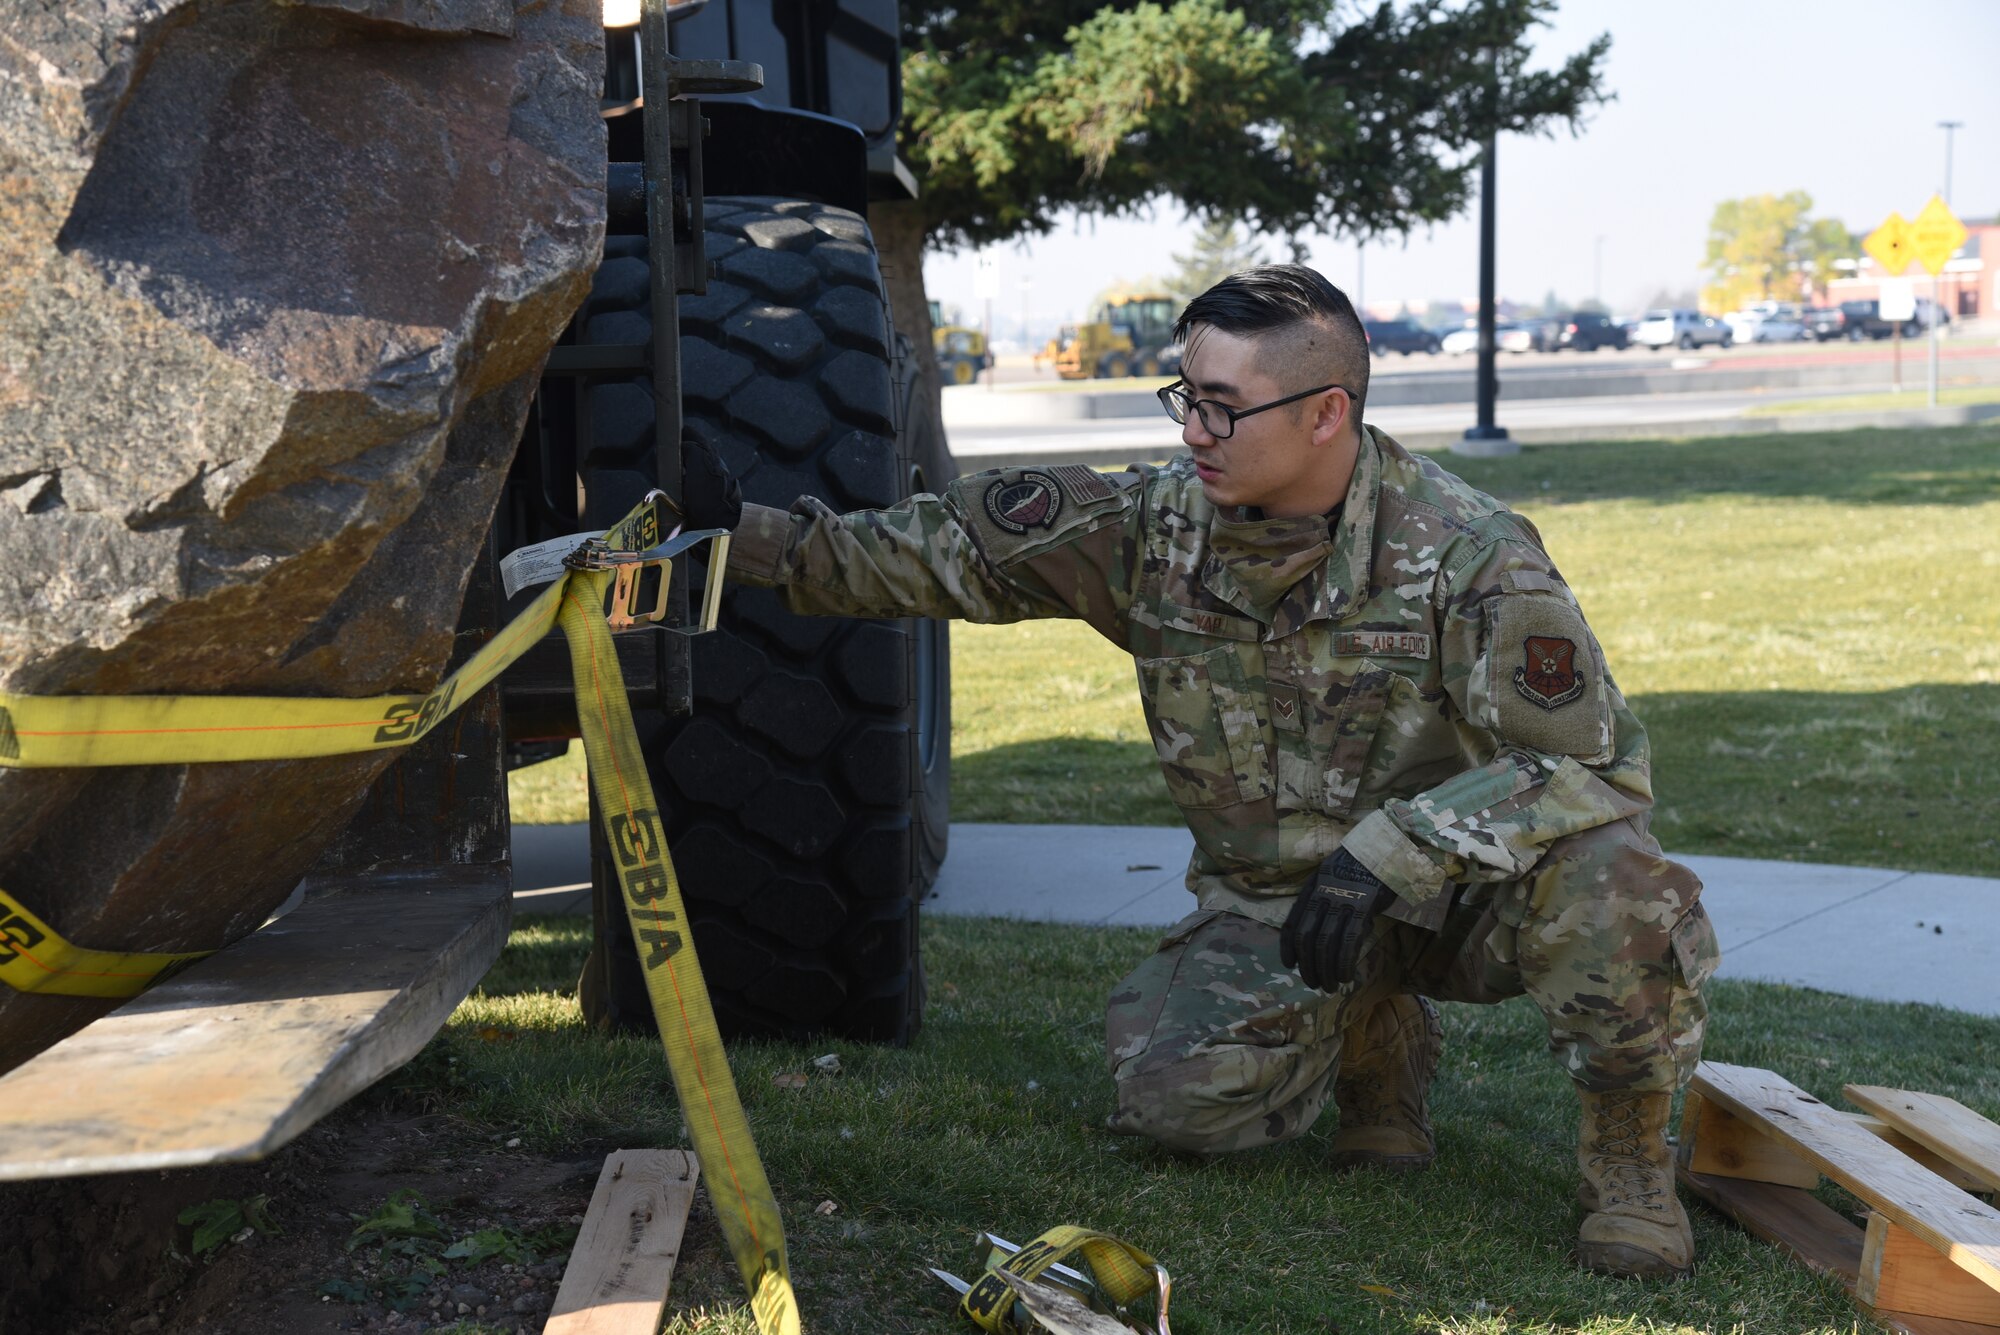 Airman placing straps on memorial stone